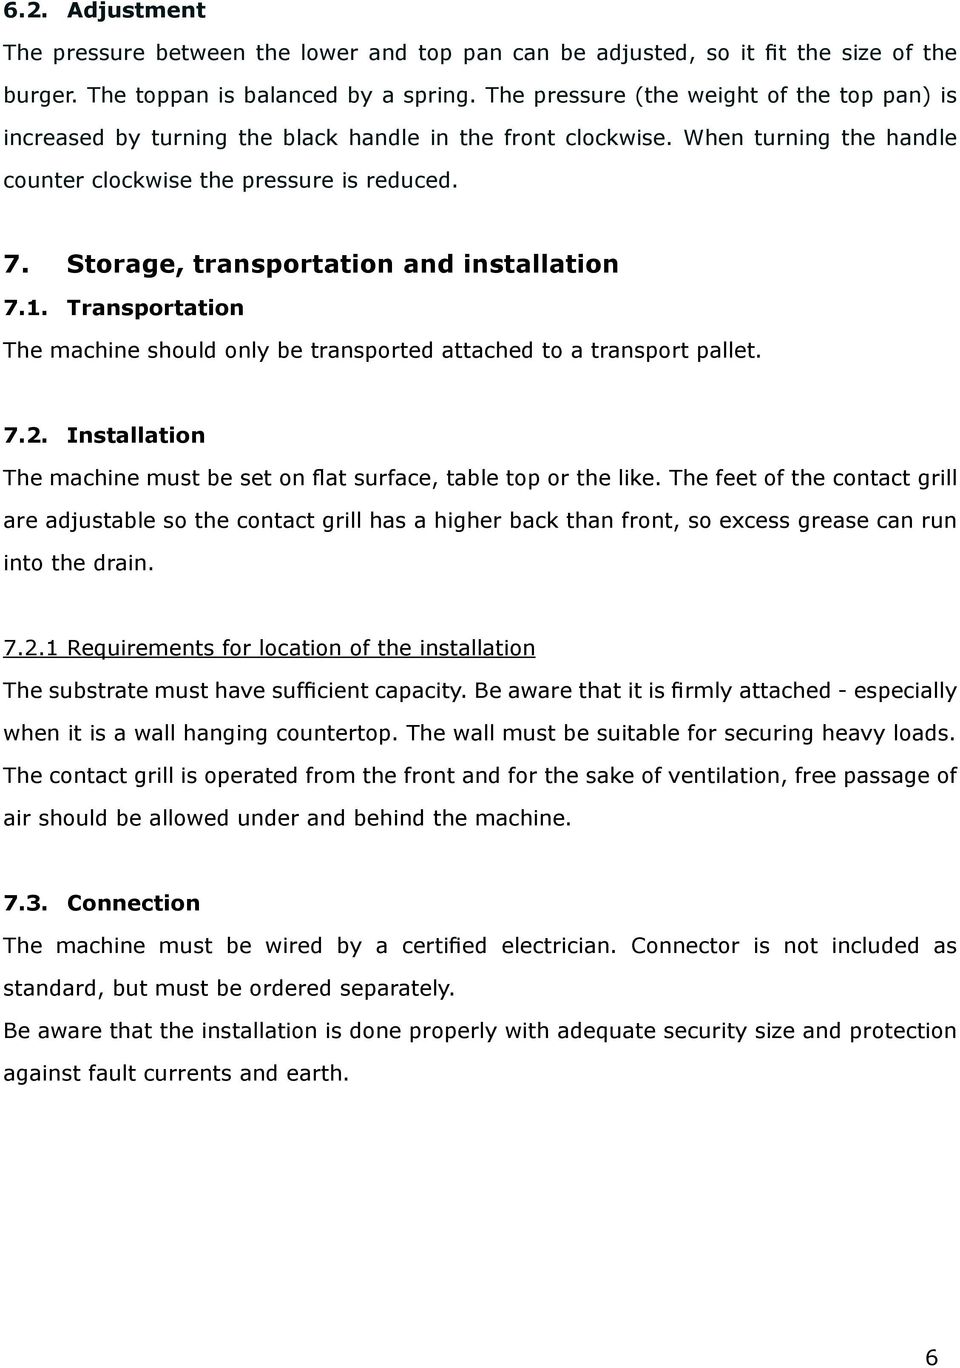 Storage, transportation and installation 7.1. Transportation The machine should only be transported attached to a transport pallet. 7.2.